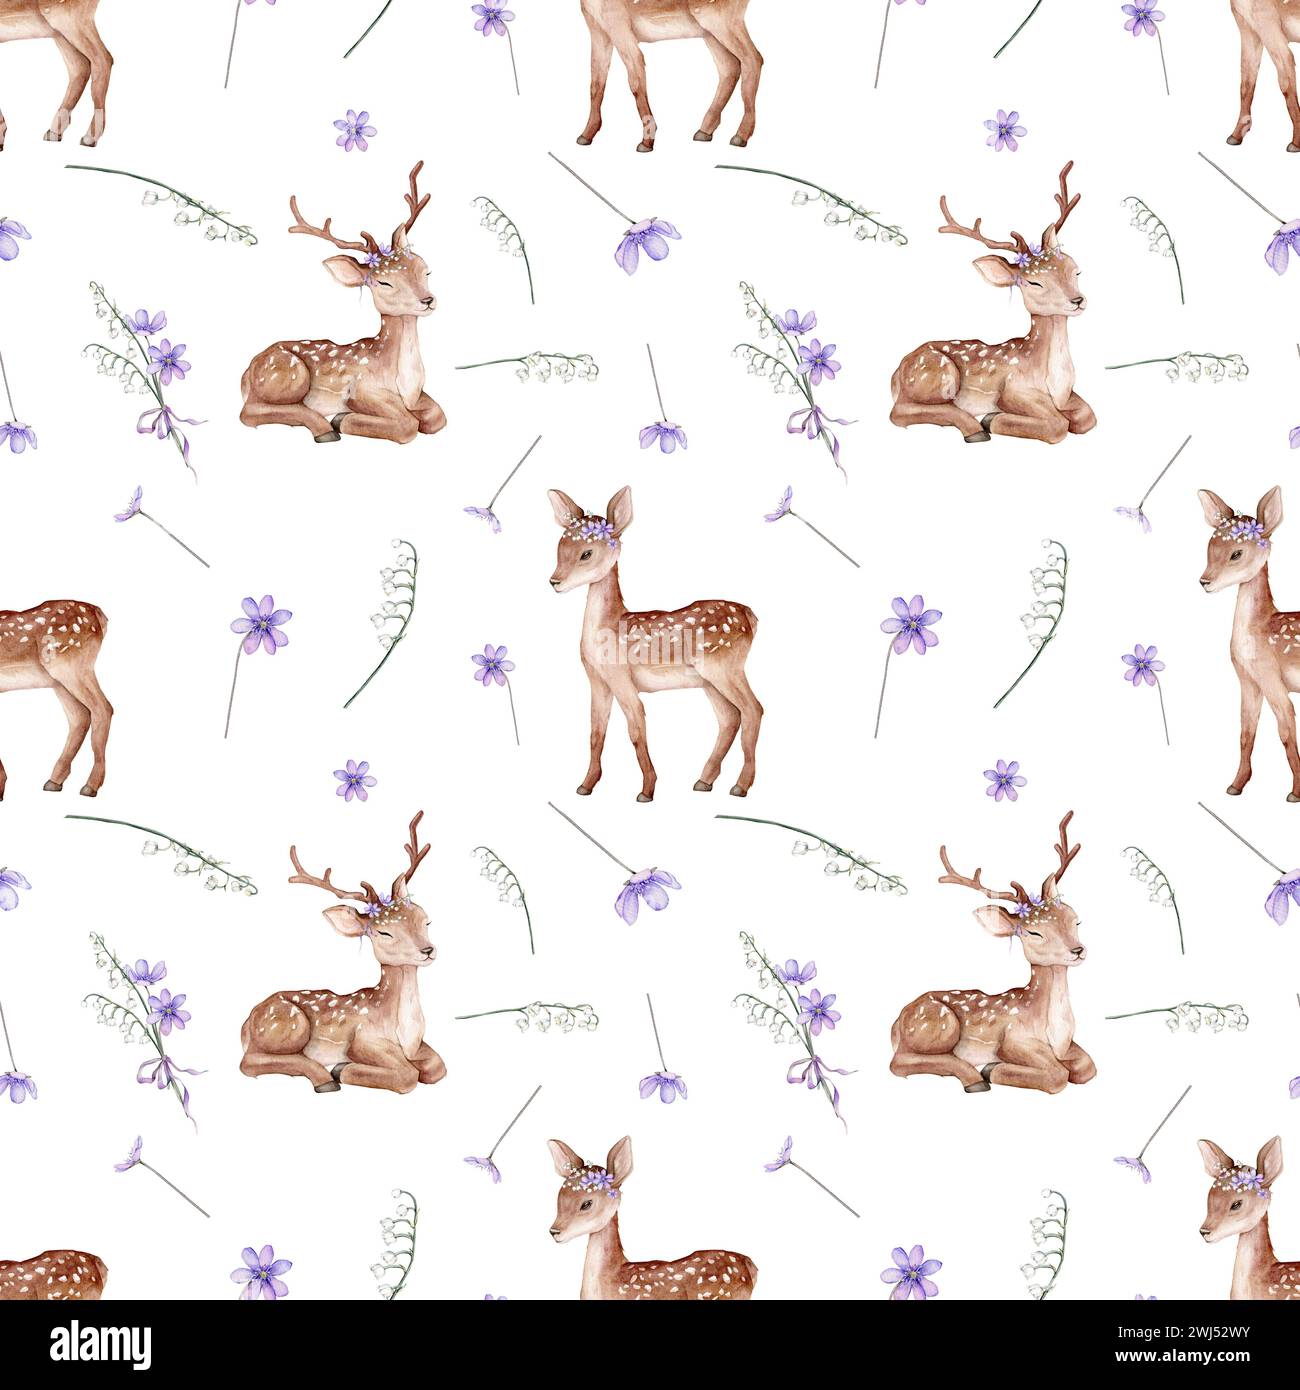 Watercolor seamless pattern deer and first spring flowers. Flowers violet coppice and lily of the violet valley green branches. Spotted deer isolated Stock Photo